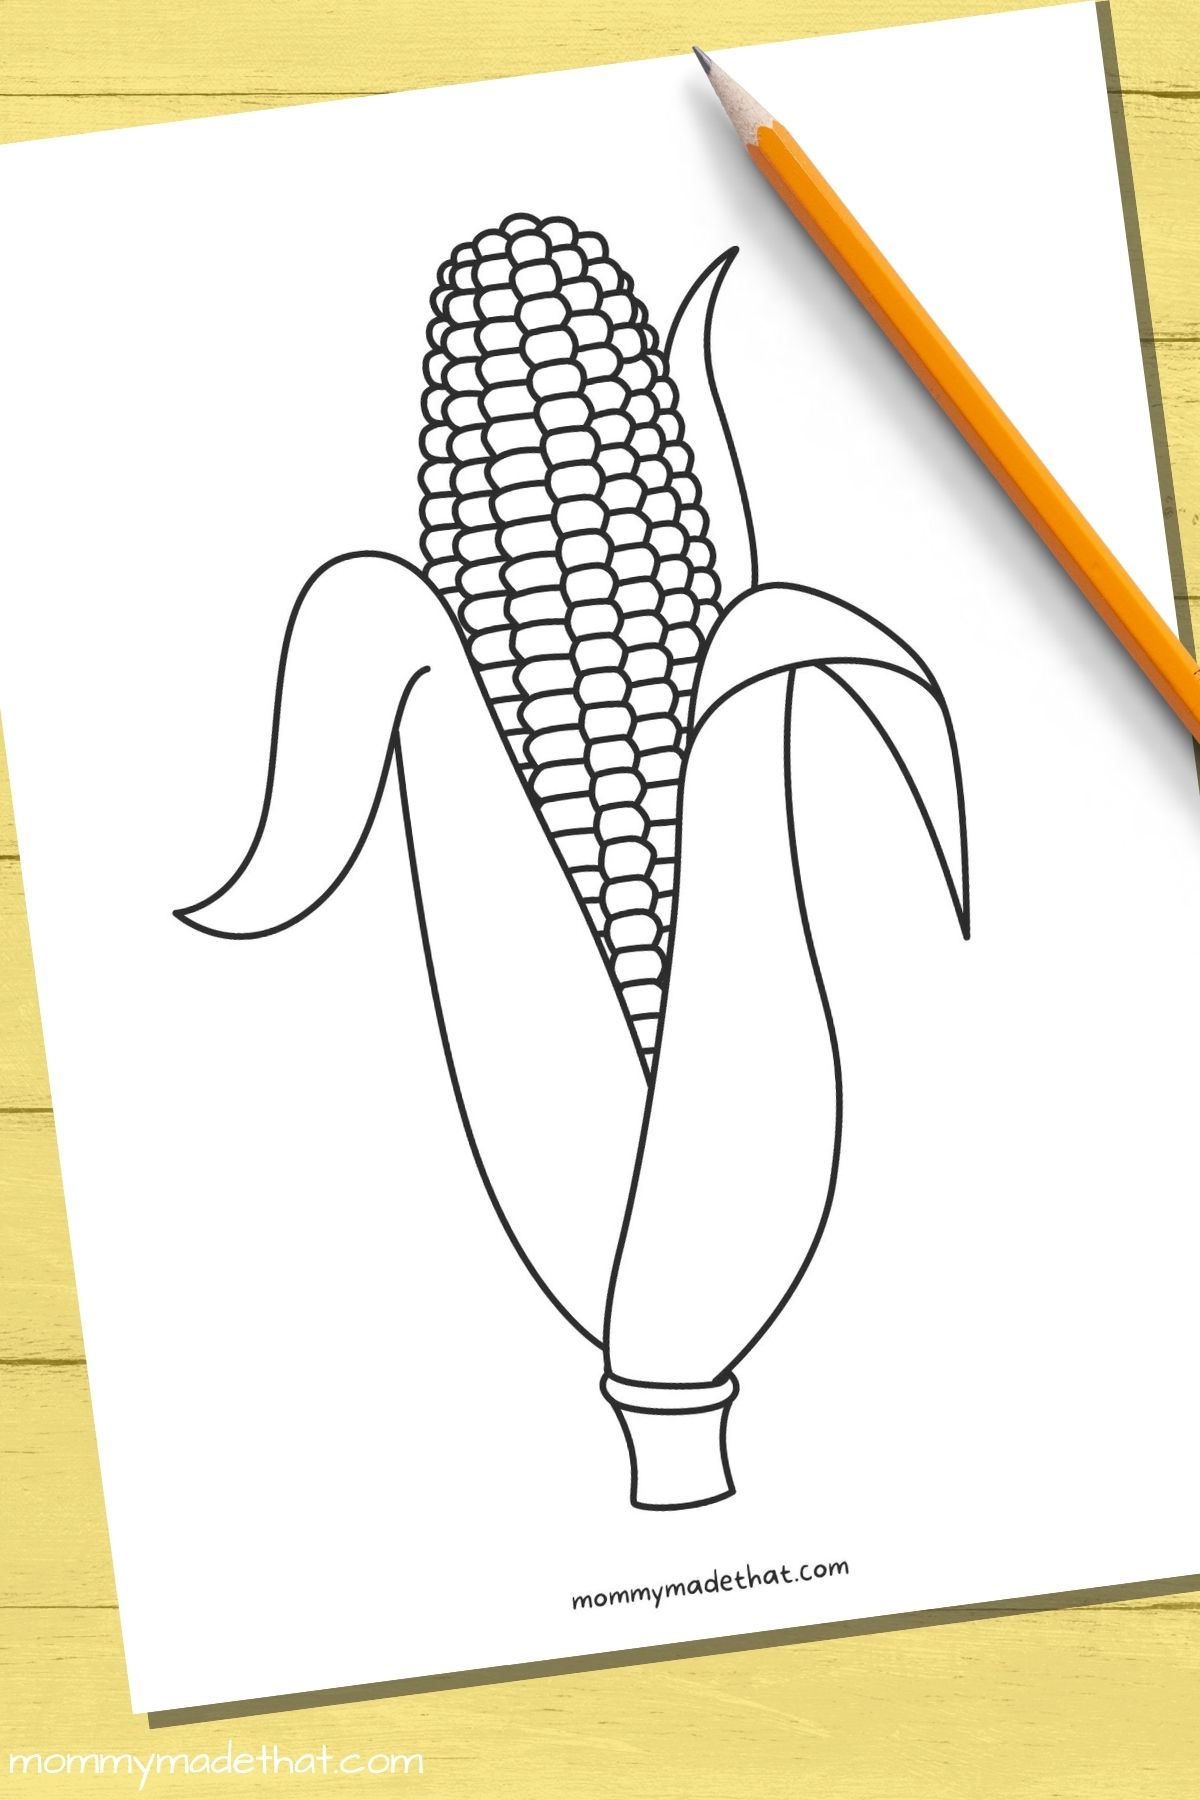 Free Printable Corn Templates & Outlines for Fall Crafts